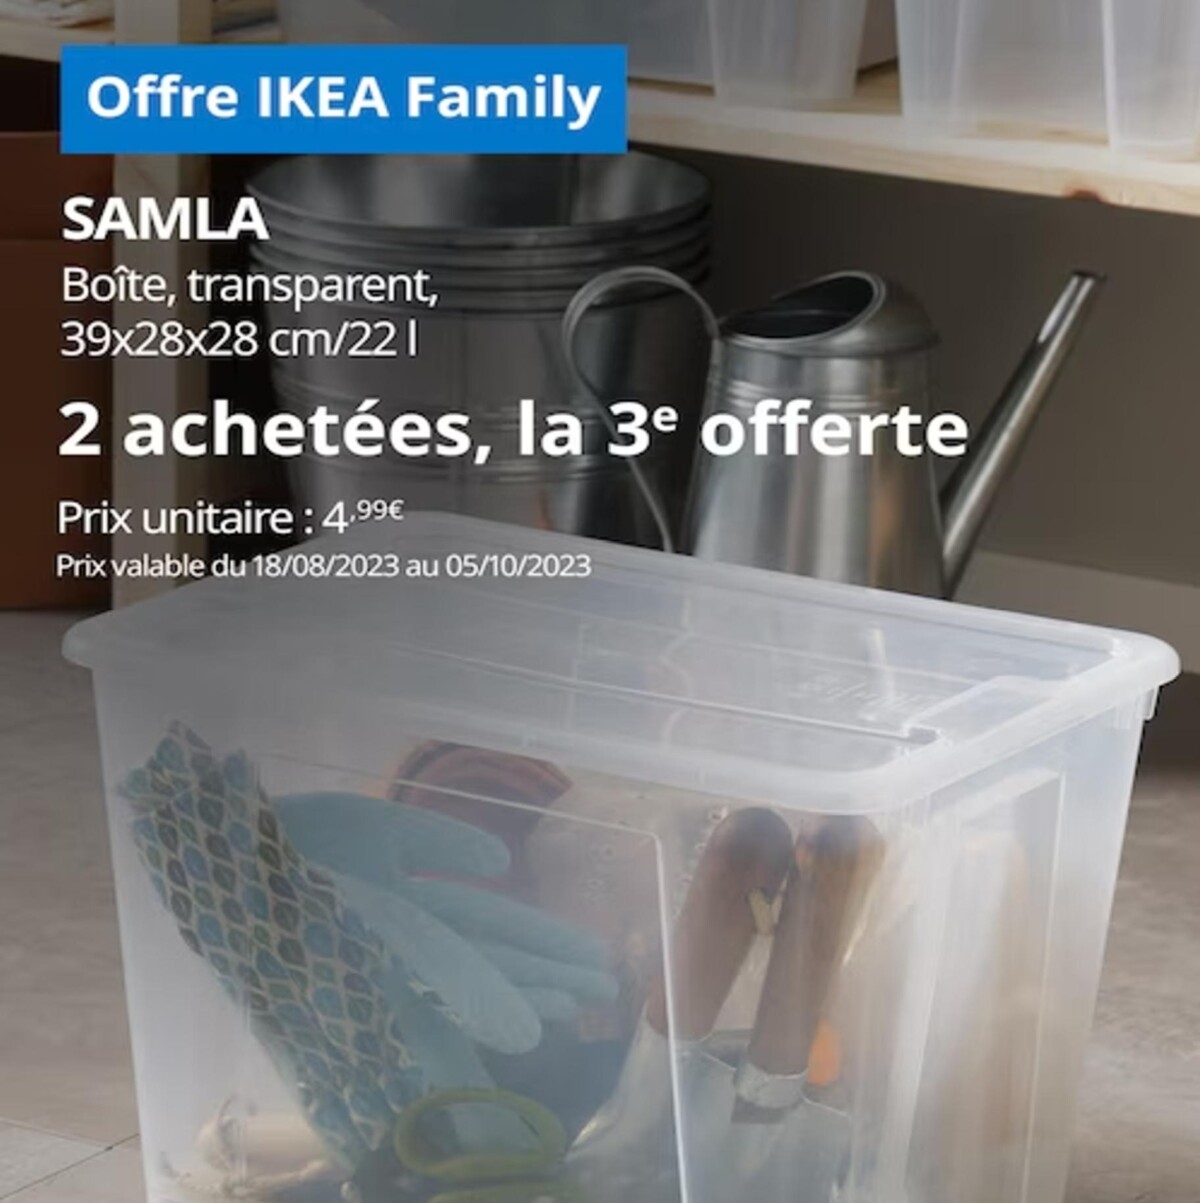 Catalogue Offre Ikea Family, page 00004